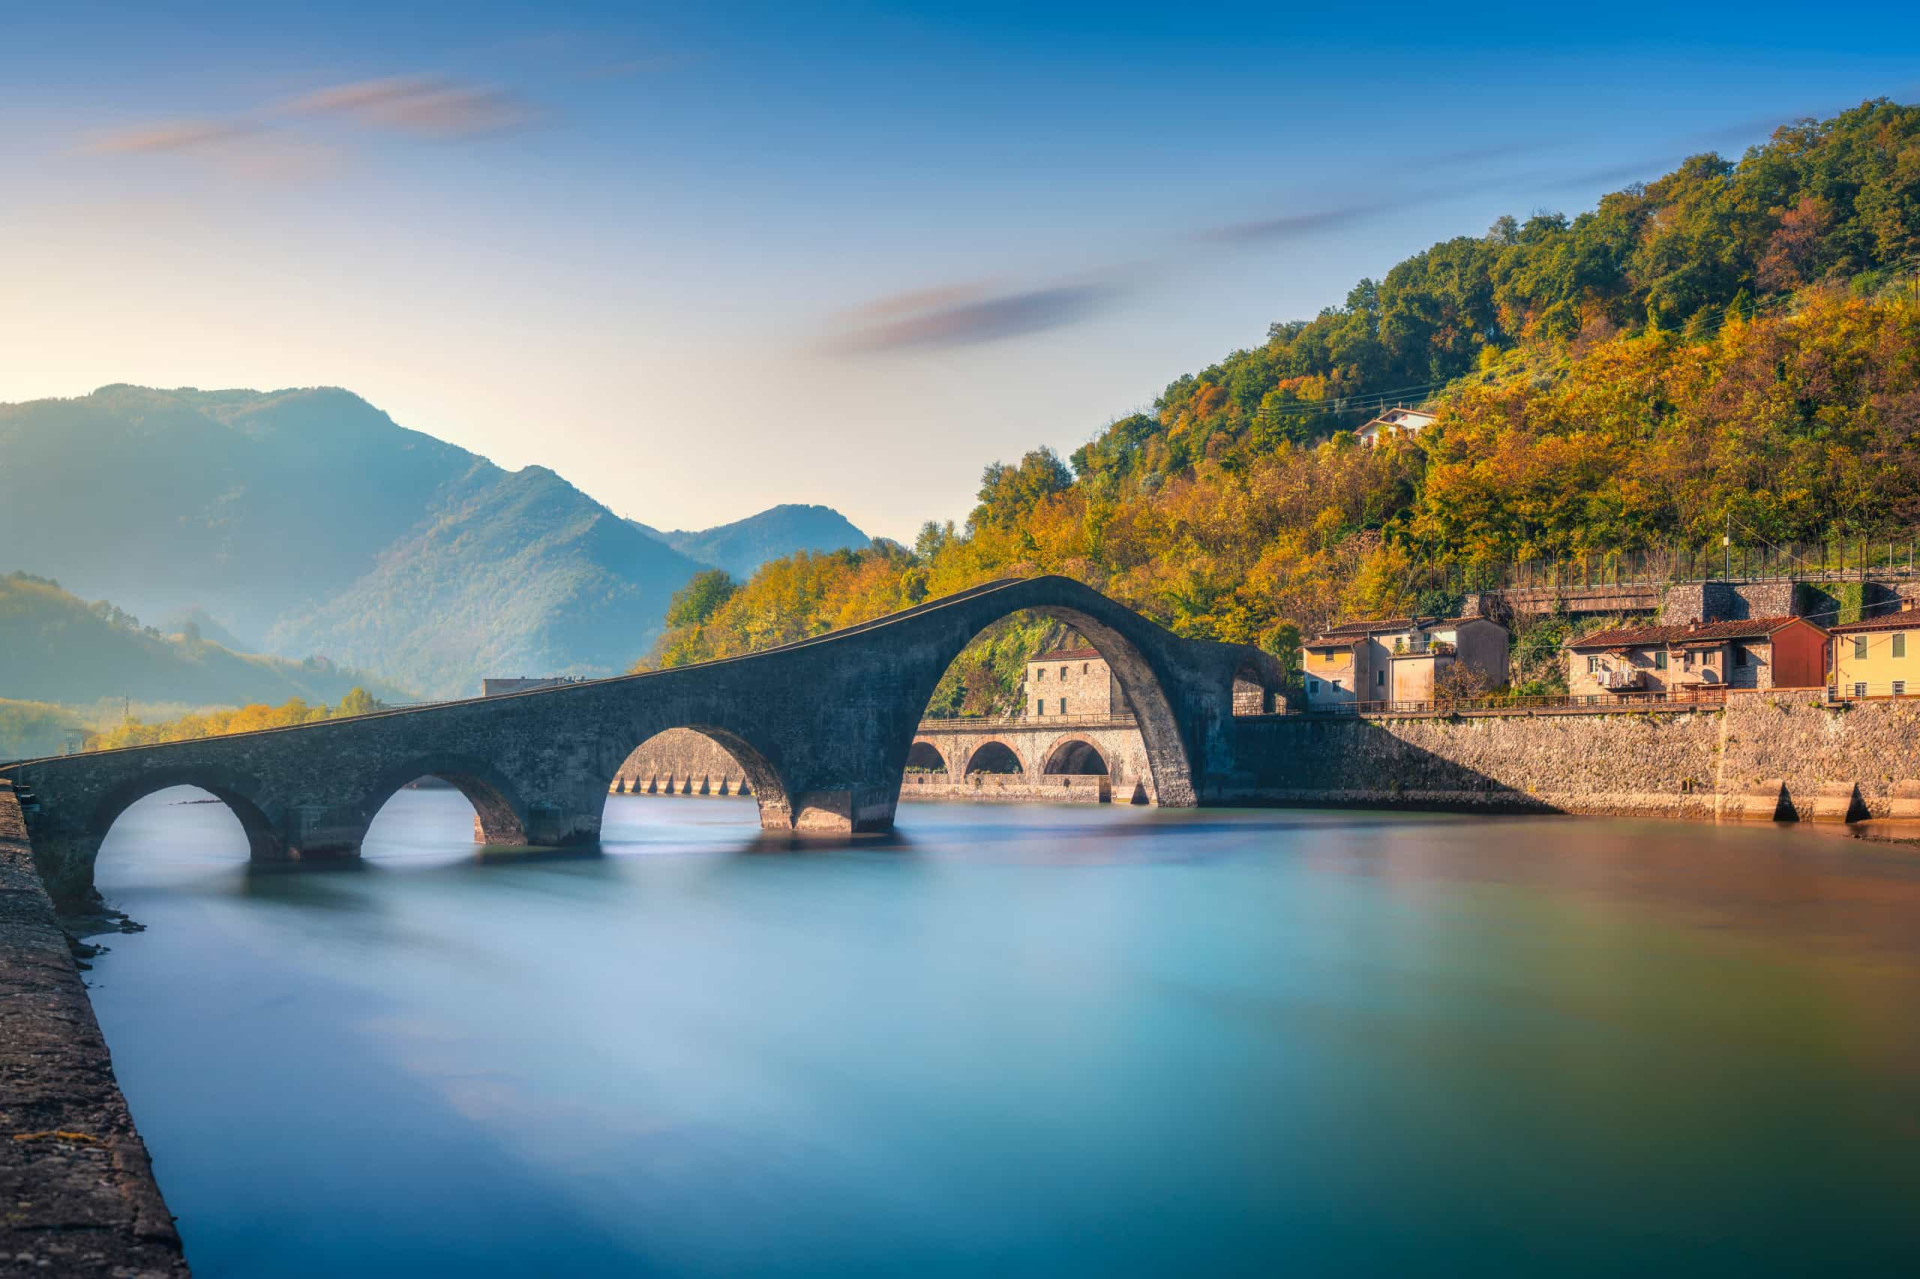 <p>Borgo a Mozzano in the Tuscan province of Lucca is celebrated for its Ponte della Maddalena, a magnificent medieval <a href="https://www.starsinsider.com/travel/206237/the-worlds-most-remarkable-bridges" rel="noopener">bridge</a>.</p><p>You may also like:<a href="https://www.starsinsider.com/n/190653?utm_source=msn.com&utm_medium=display&utm_campaign=referral_description&utm_content=481361v4en-en_selected"> Mystery solved? A look at Amelia Earhart’s life and disappearance</a></p>